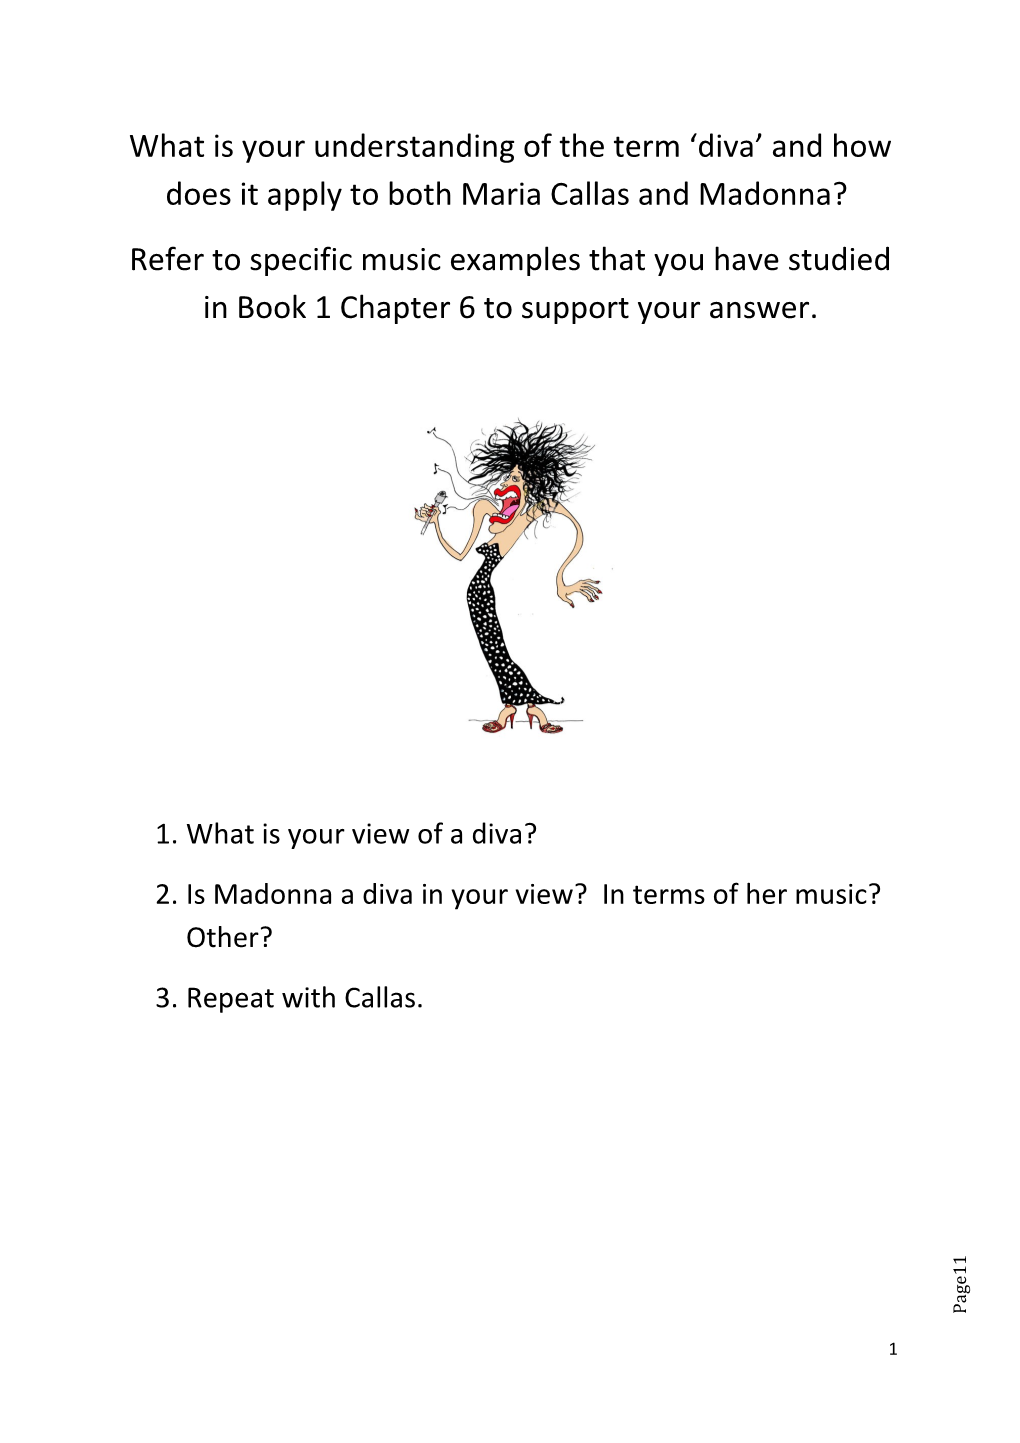 Refer to Specific Music Examples That You Have Studied in Book 1 Chapter 6 to Support Your